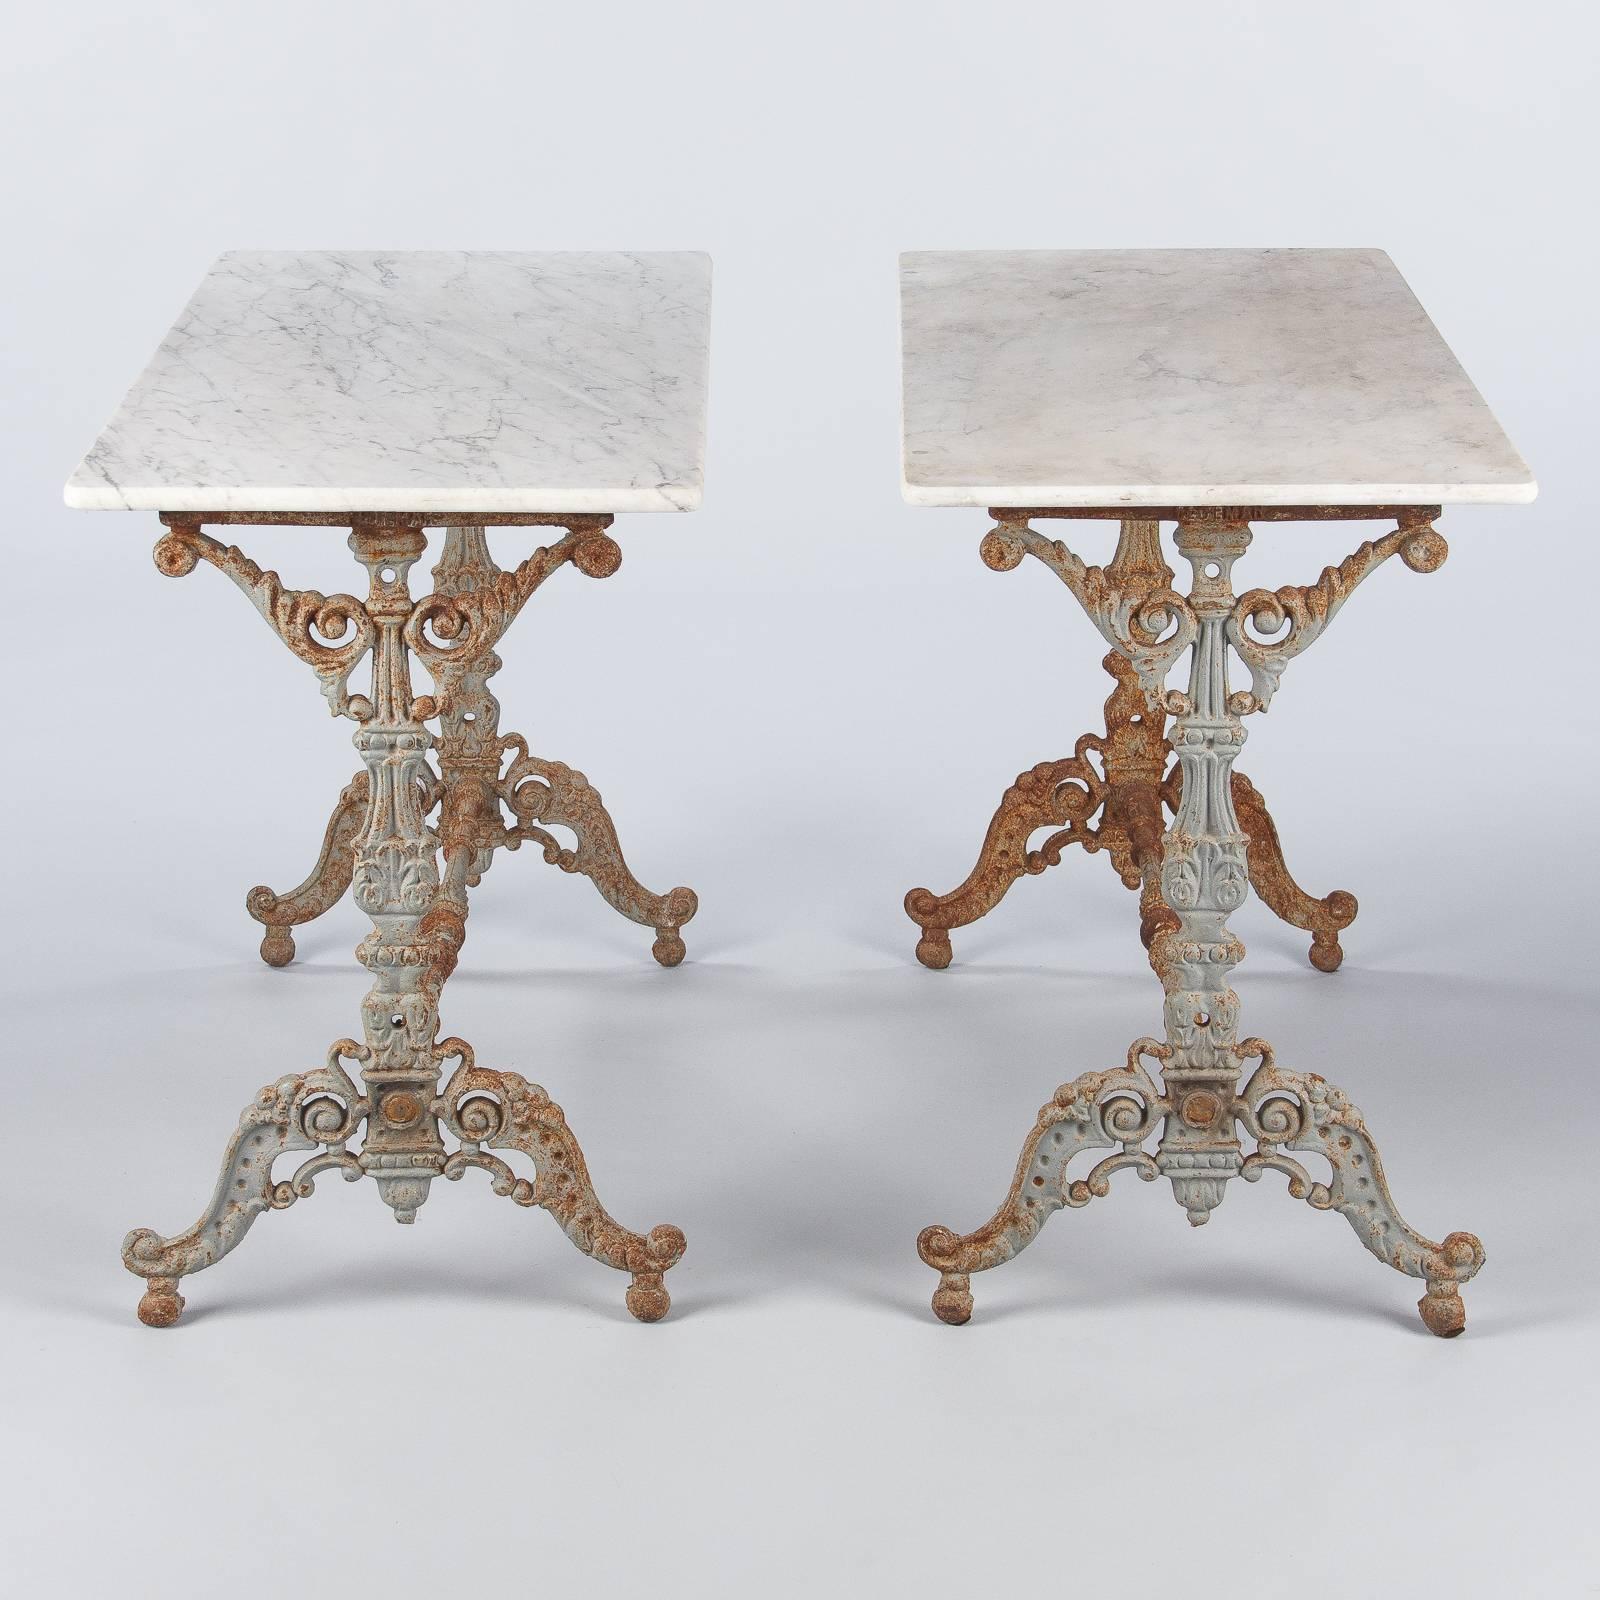 Rococo Revival Pair of Spanish Rococo Iron Base Bistro Tables with Marble Tops, Late 1800s For Sale